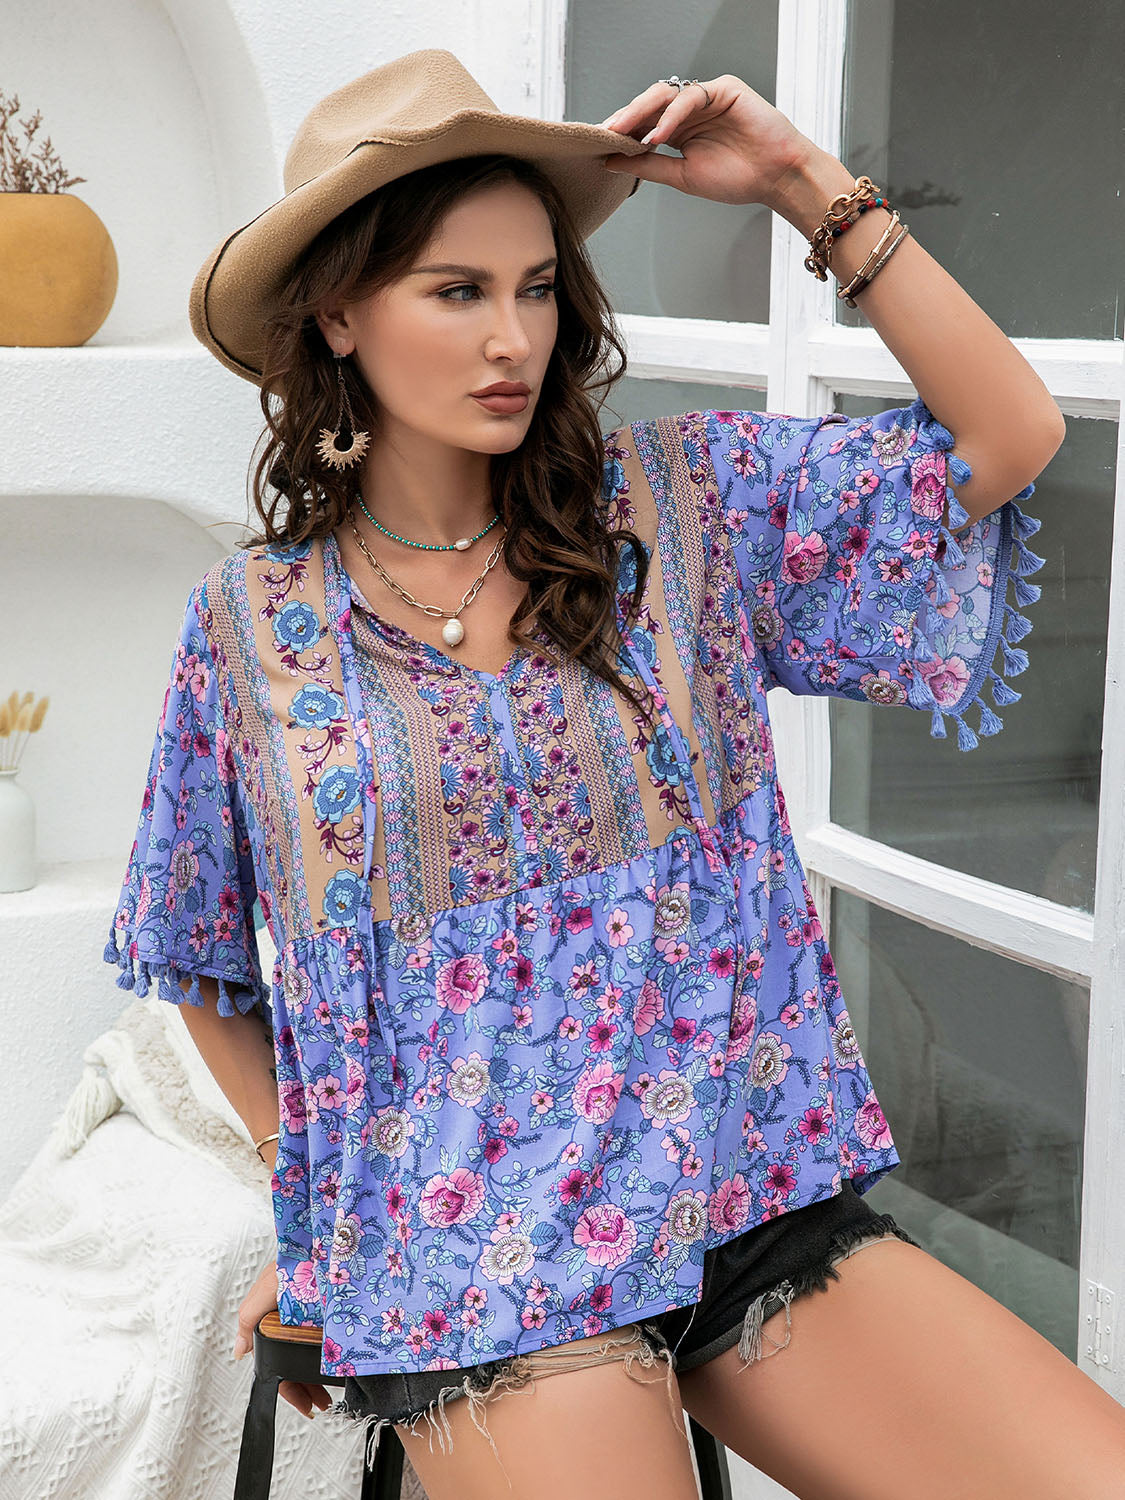 Stylish purple floral blouse with lace accents and short sleeves